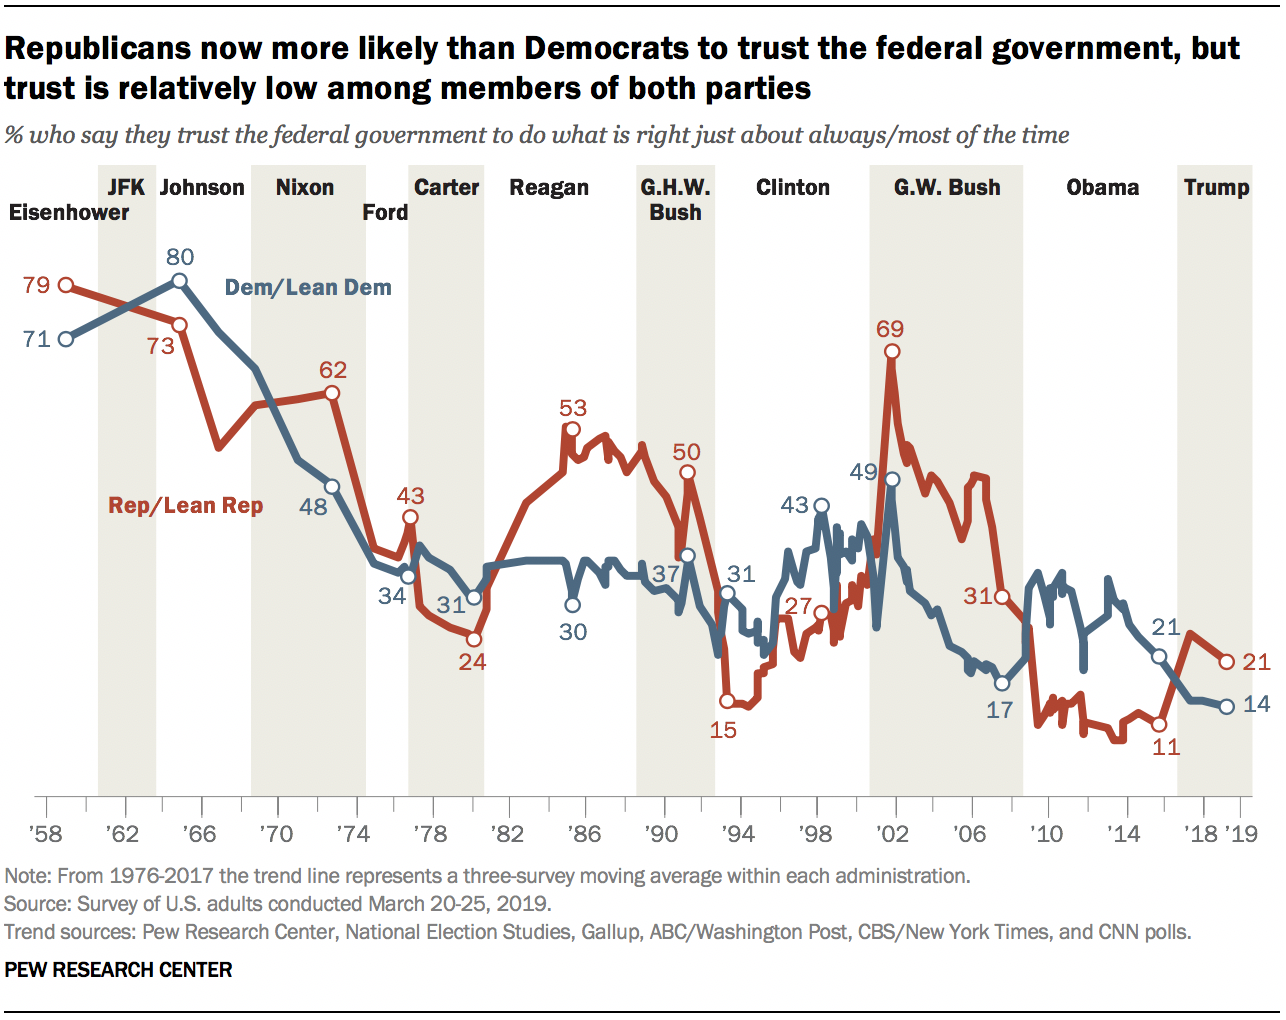 Republicans now more likely than Democrats to trust the federal government, but trust is relatively low among members of both parties